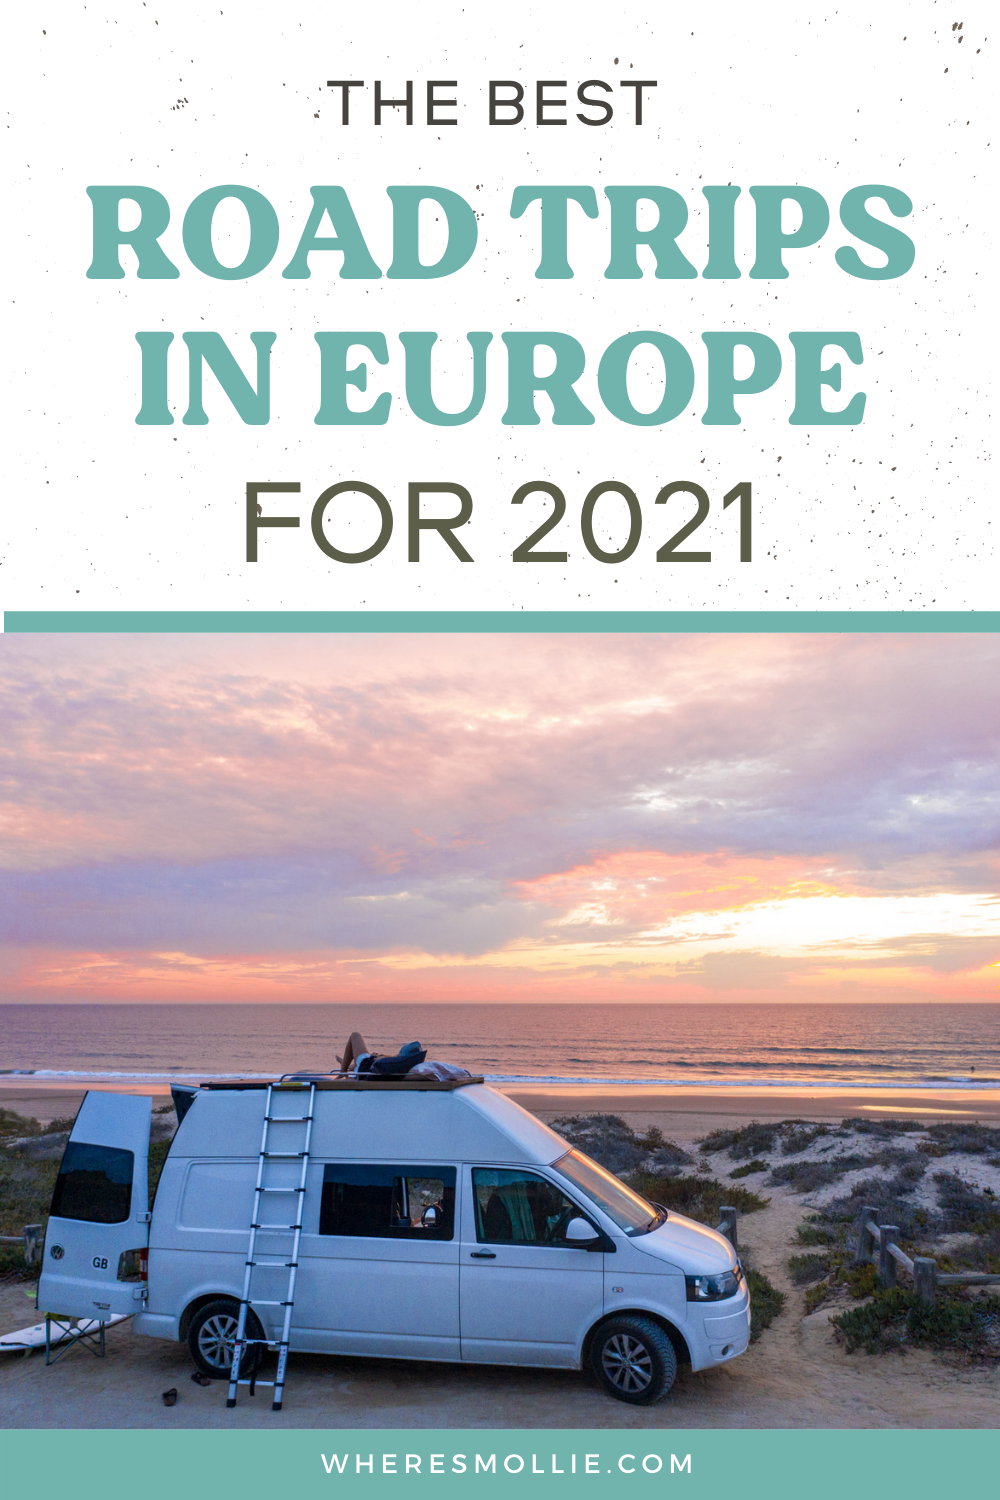 Van life in Europe: A bucket list of road trips to go on